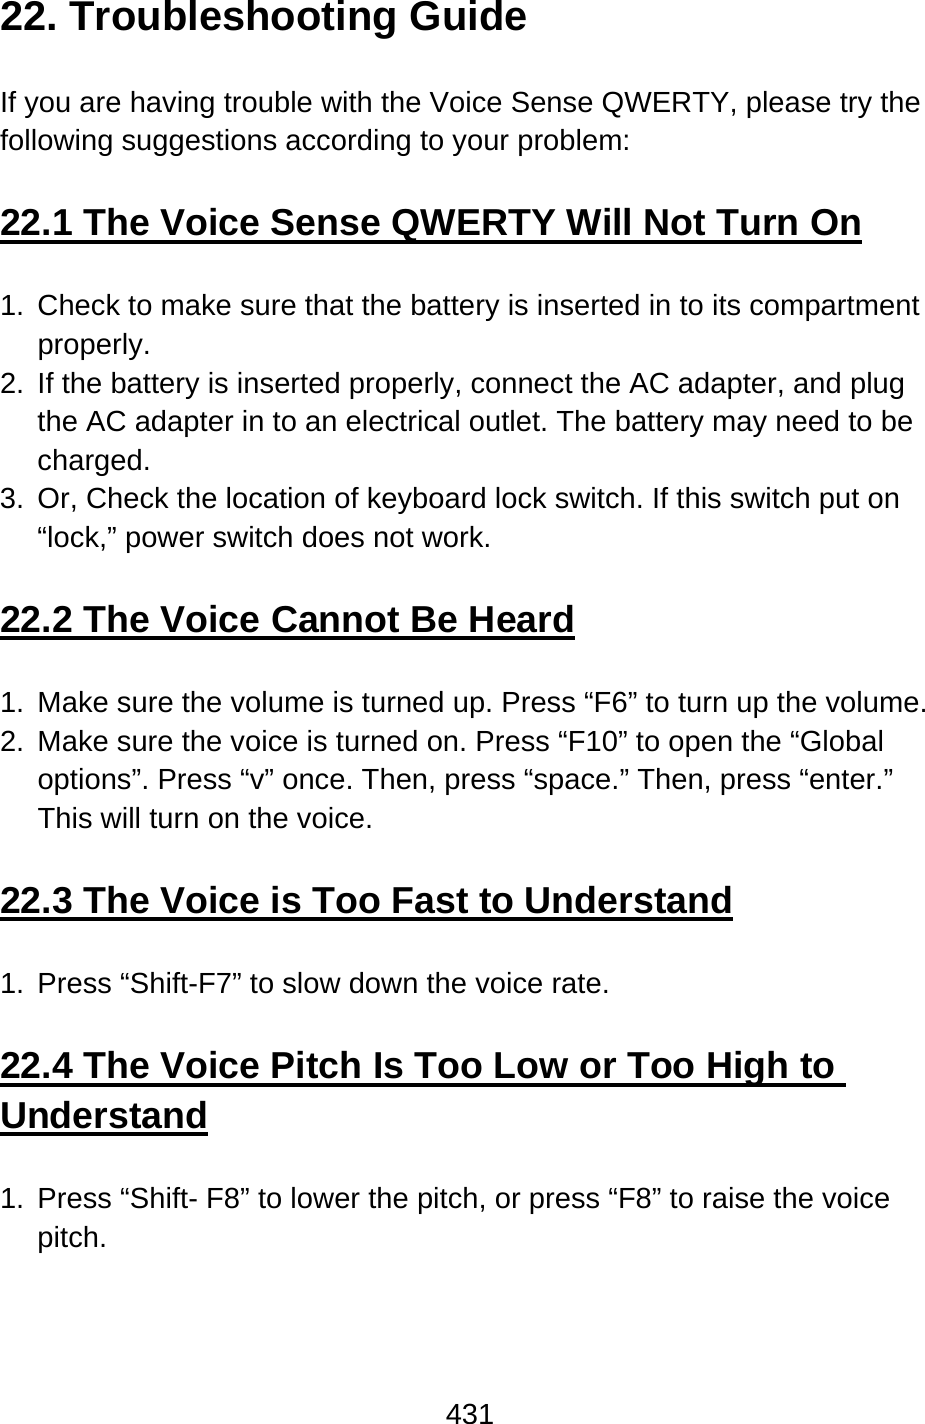 431  22. Troubleshooting Guide  If you are having trouble with the Voice Sense QWERTY, please try the following suggestions according to your problem:  22.1 The Voice Sense QWERTY Will Not Turn On  1.  Check to make sure that the battery is inserted in to its compartment properly. 2.  If the battery is inserted properly, connect the AC adapter, and plug the AC adapter in to an electrical outlet. The battery may need to be charged. 3.  Or, Check the location of keyboard lock switch. If this switch put on “lock,” power switch does not work.  22.2 The Voice Cannot Be Heard  1.  Make sure the volume is turned up. Press “F6” to turn up the volume. 2.  Make sure the voice is turned on. Press “F10” to open the “Global options”. Press “v” once. Then, press “space.” Then, press “enter.”   This will turn on the voice.  22.3 The Voice is Too Fast to Understand  1.  Press “Shift-F7” to slow down the voice rate.  22.4 The Voice Pitch Is Too Low or Too High to Understand  1.  Press “Shift- F8” to lower the pitch, or press “F8” to raise the voice pitch.    